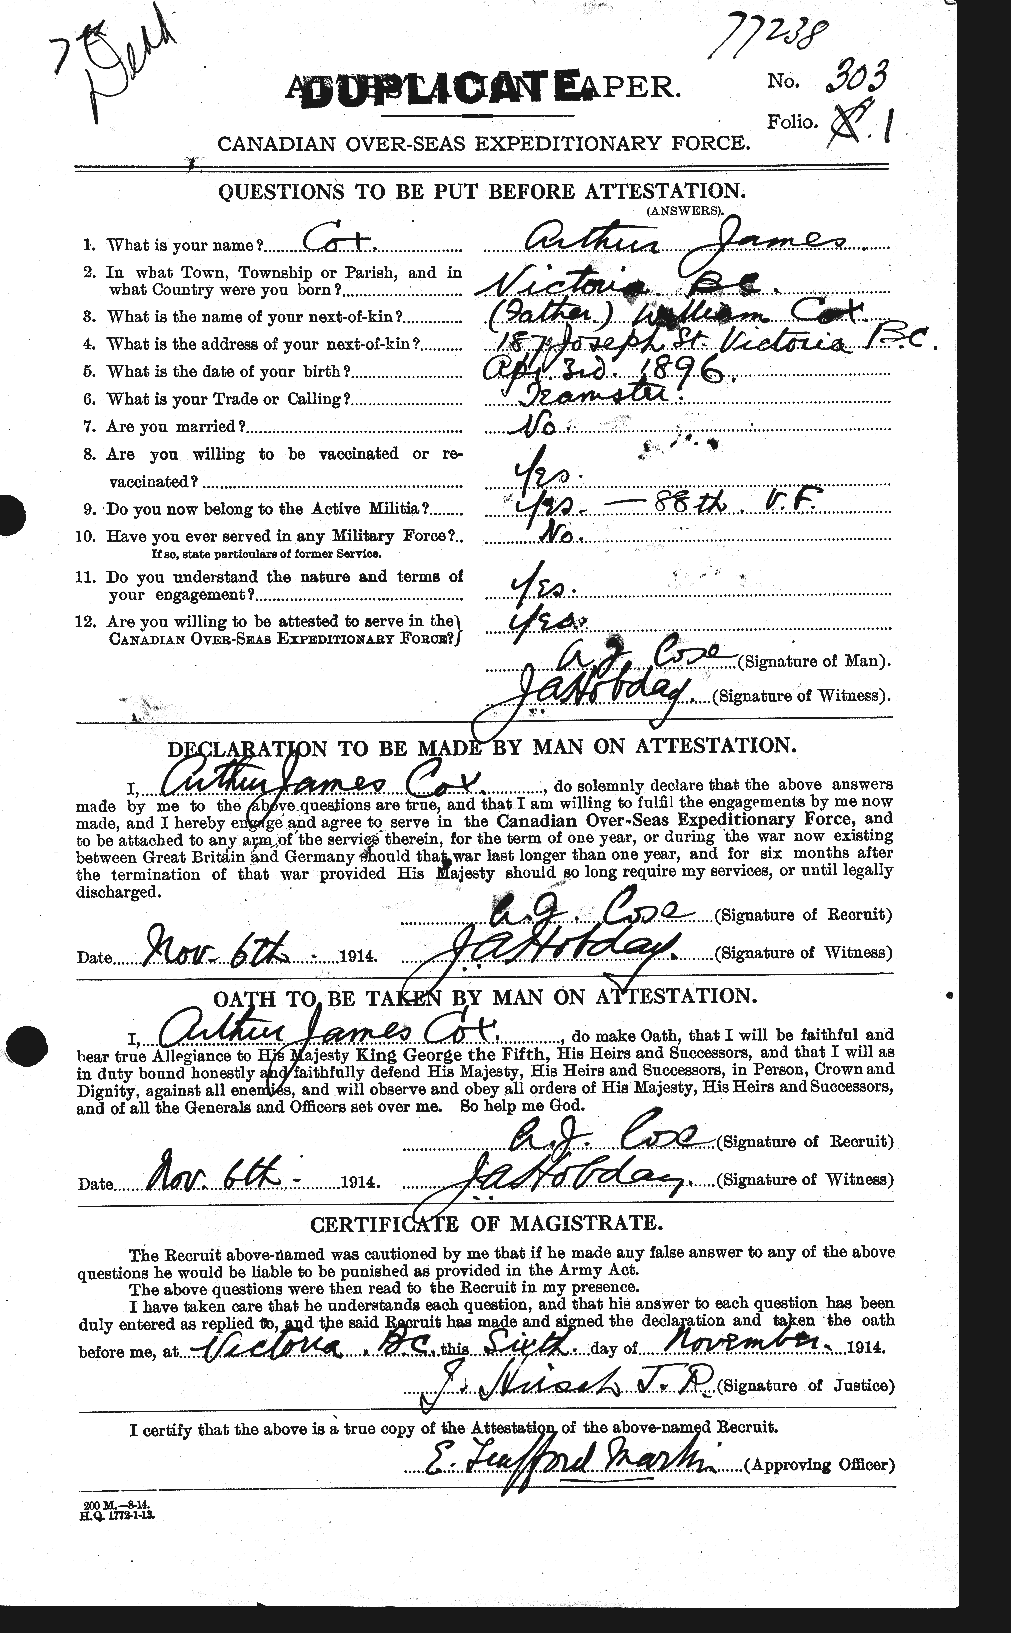 Personnel Records of the First World War - CEF 061113a